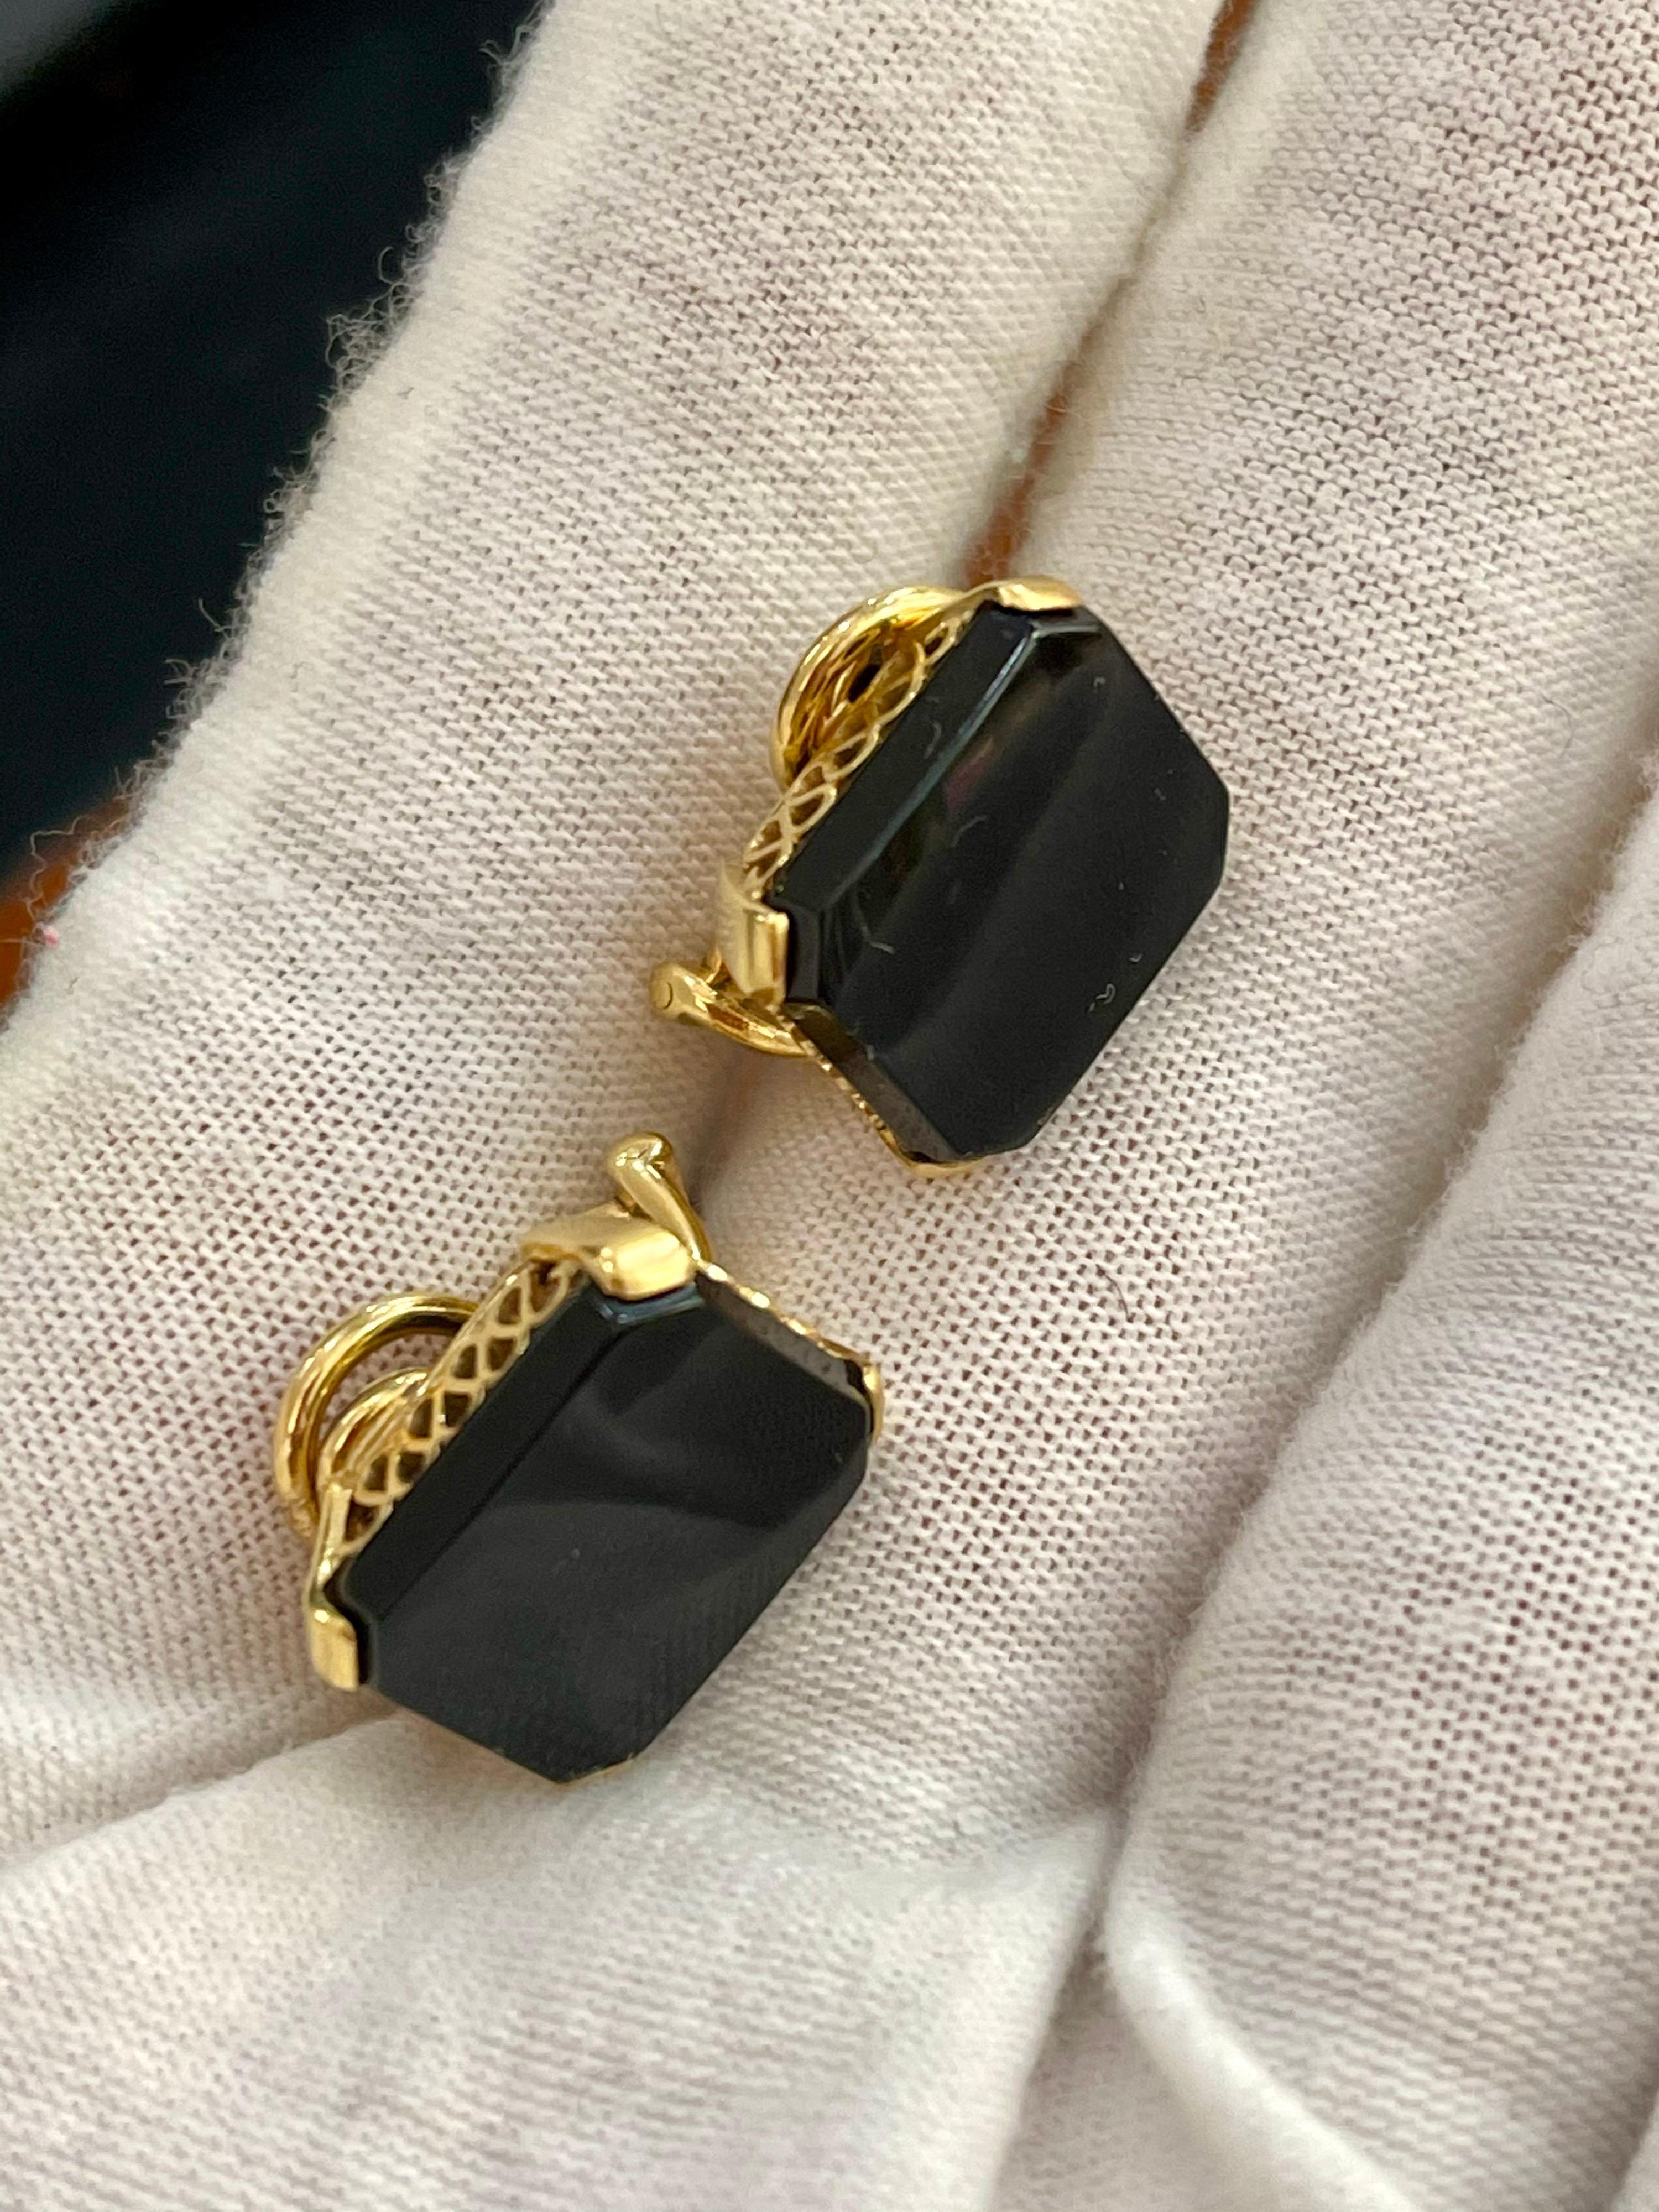 11 X 14 Emerald Cut Black Onyx  Clip Earring In 18 Karat  Yellow Gold , Earrings
Black Onyx perfect match pair earrings.
Stud earring with omega backs, clip earring
sits nicely on the earlobe
A post can be attached easily if you want them to be post